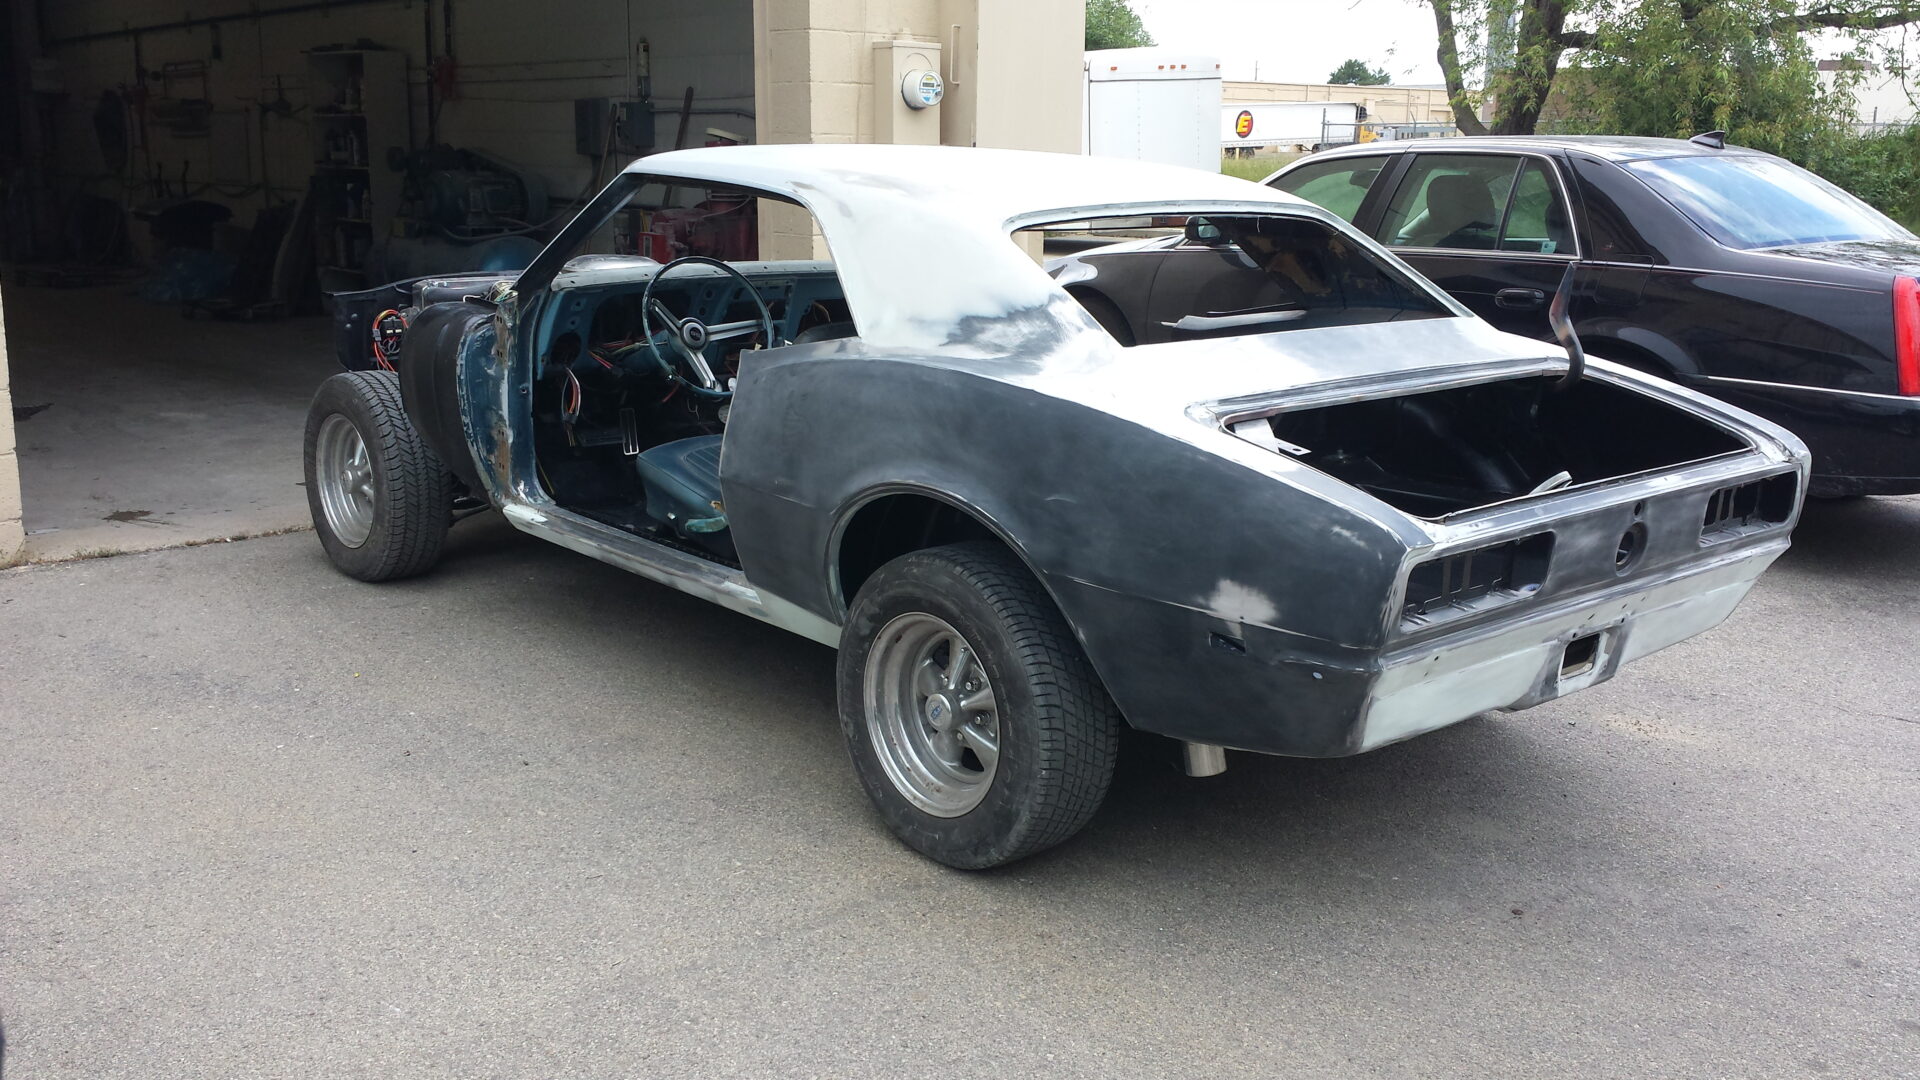 A 1968 Chevy Camaro SS with missing parts